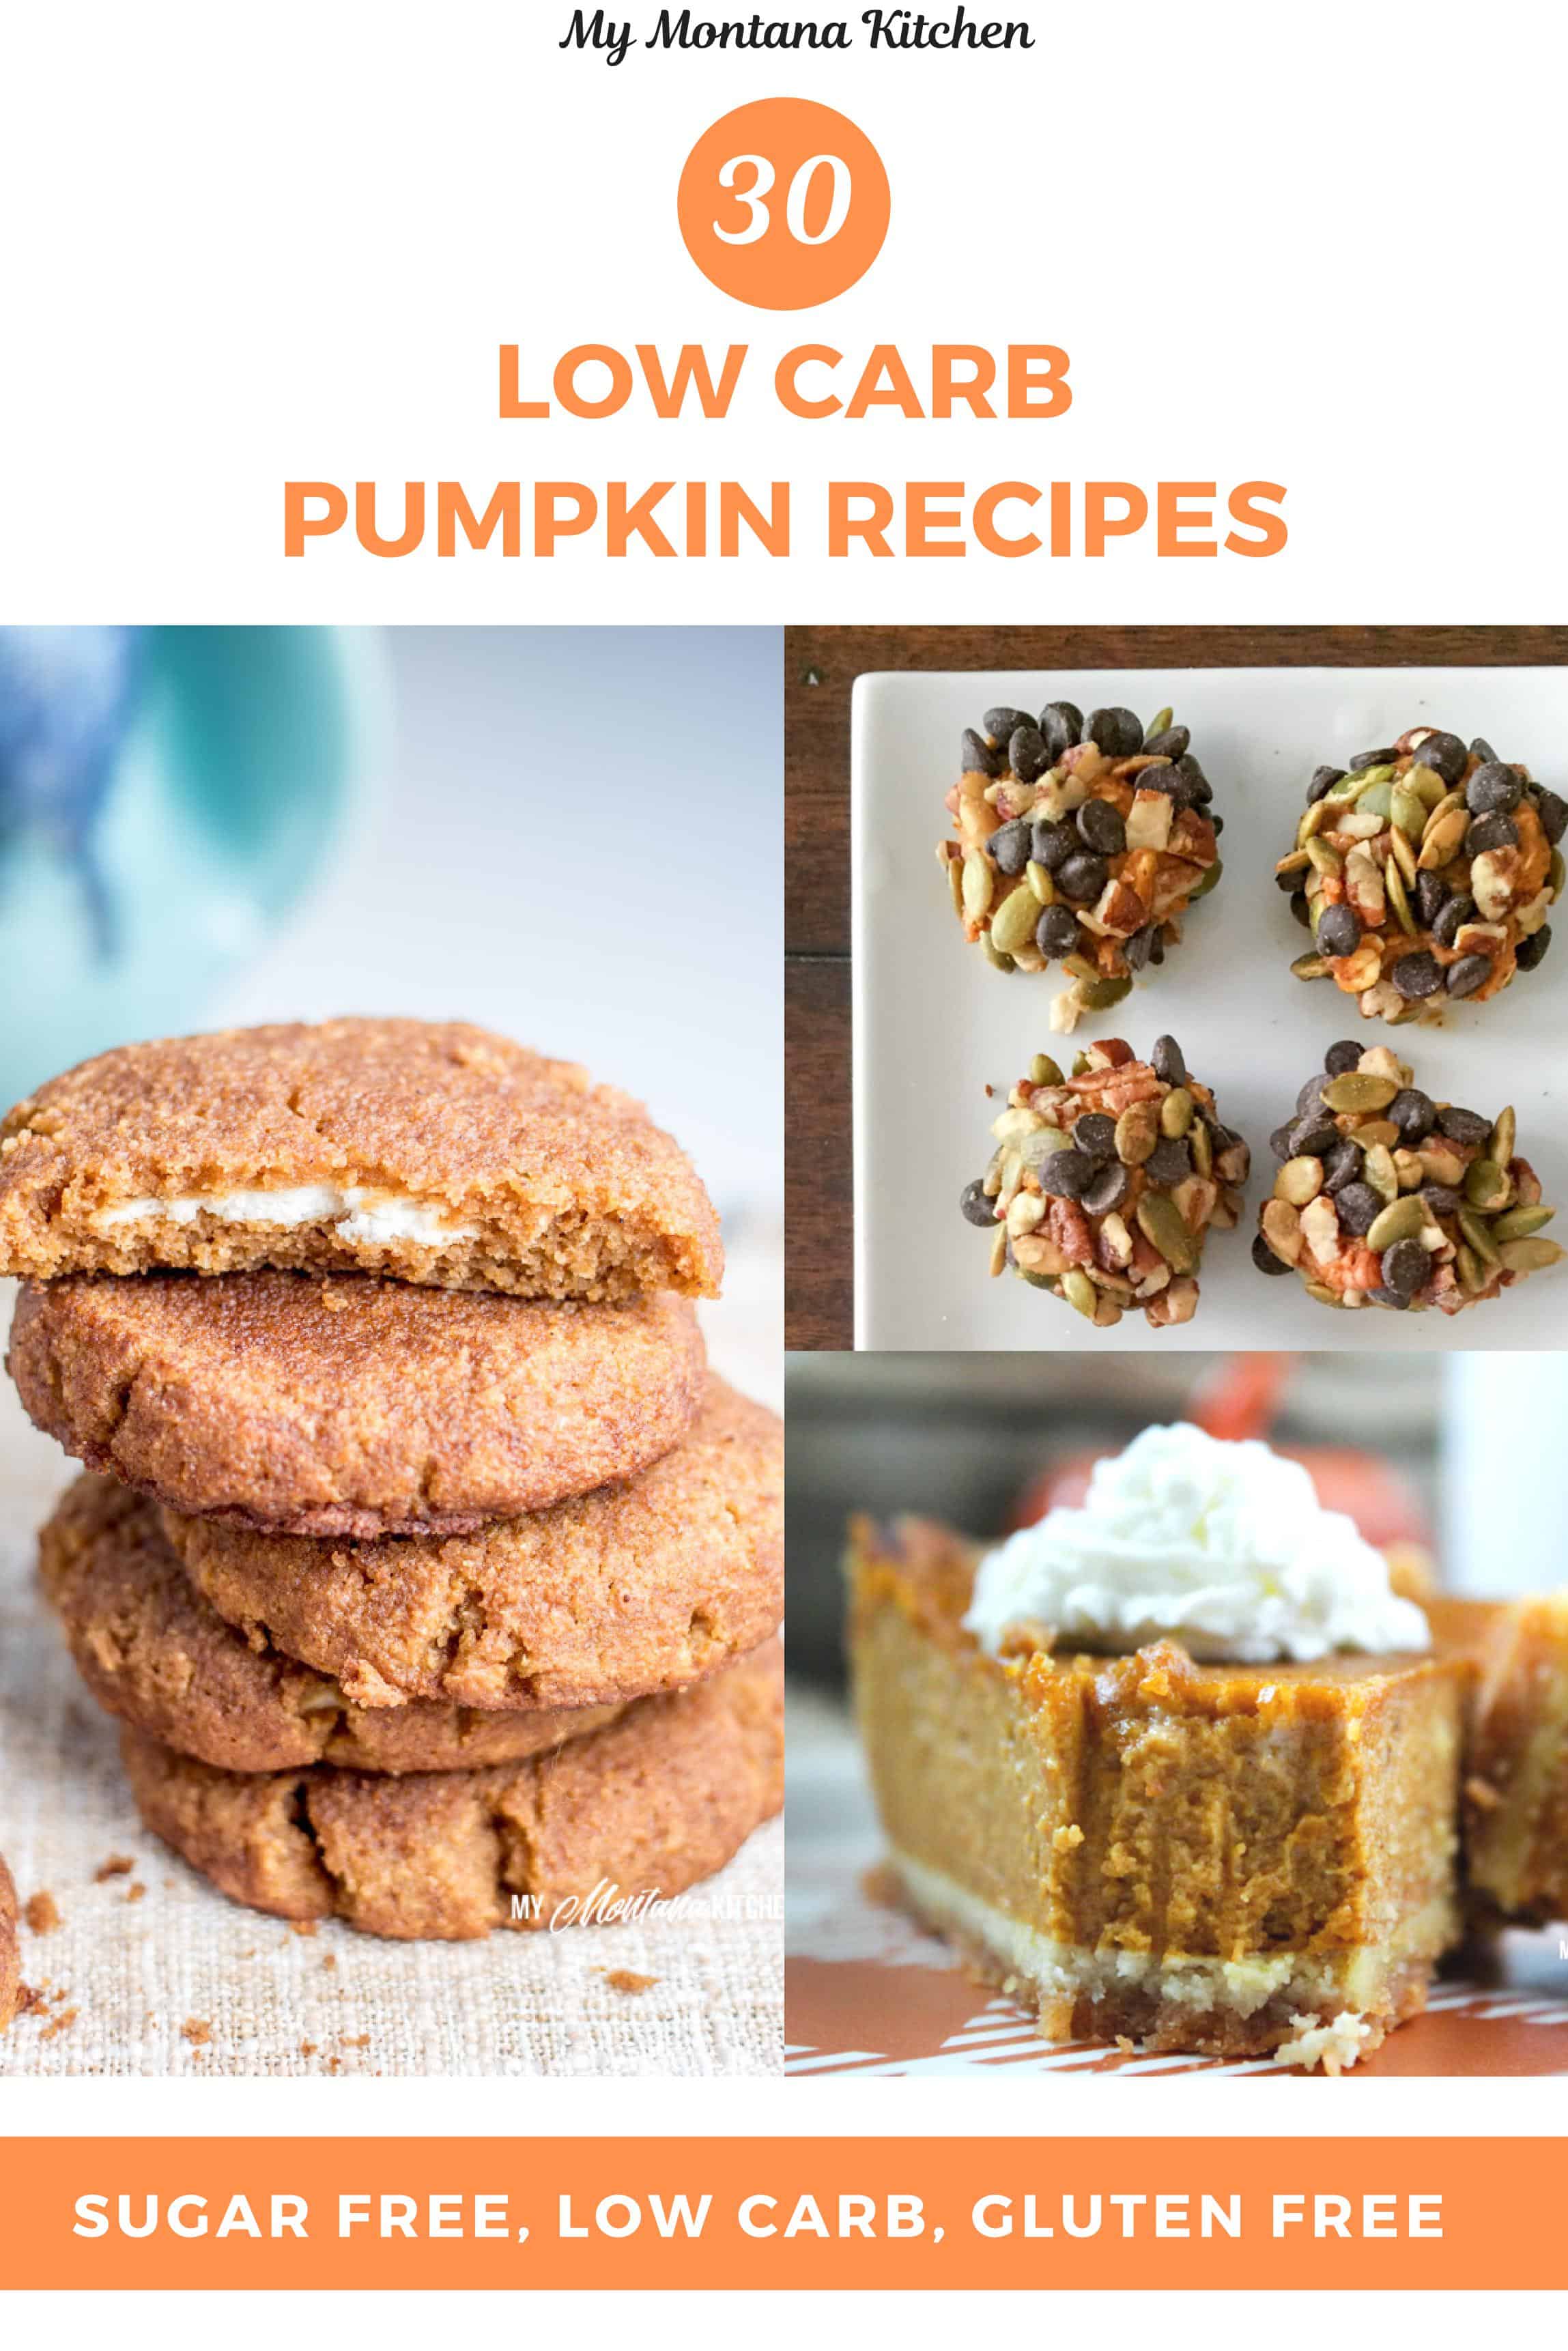 If you are looking for Low Carb Pumpkin recipes, you are sure to find something in this roundup. 30 Delicious, Keto Friendly Pumpkin Recipes - includes pies, cakes, bars, lattes, muffins, waffles, and more! #pumpkin #pumpkinspice #fall #keto #lowcarb #trimhealthymama #thm #thms #mymontanakitchen